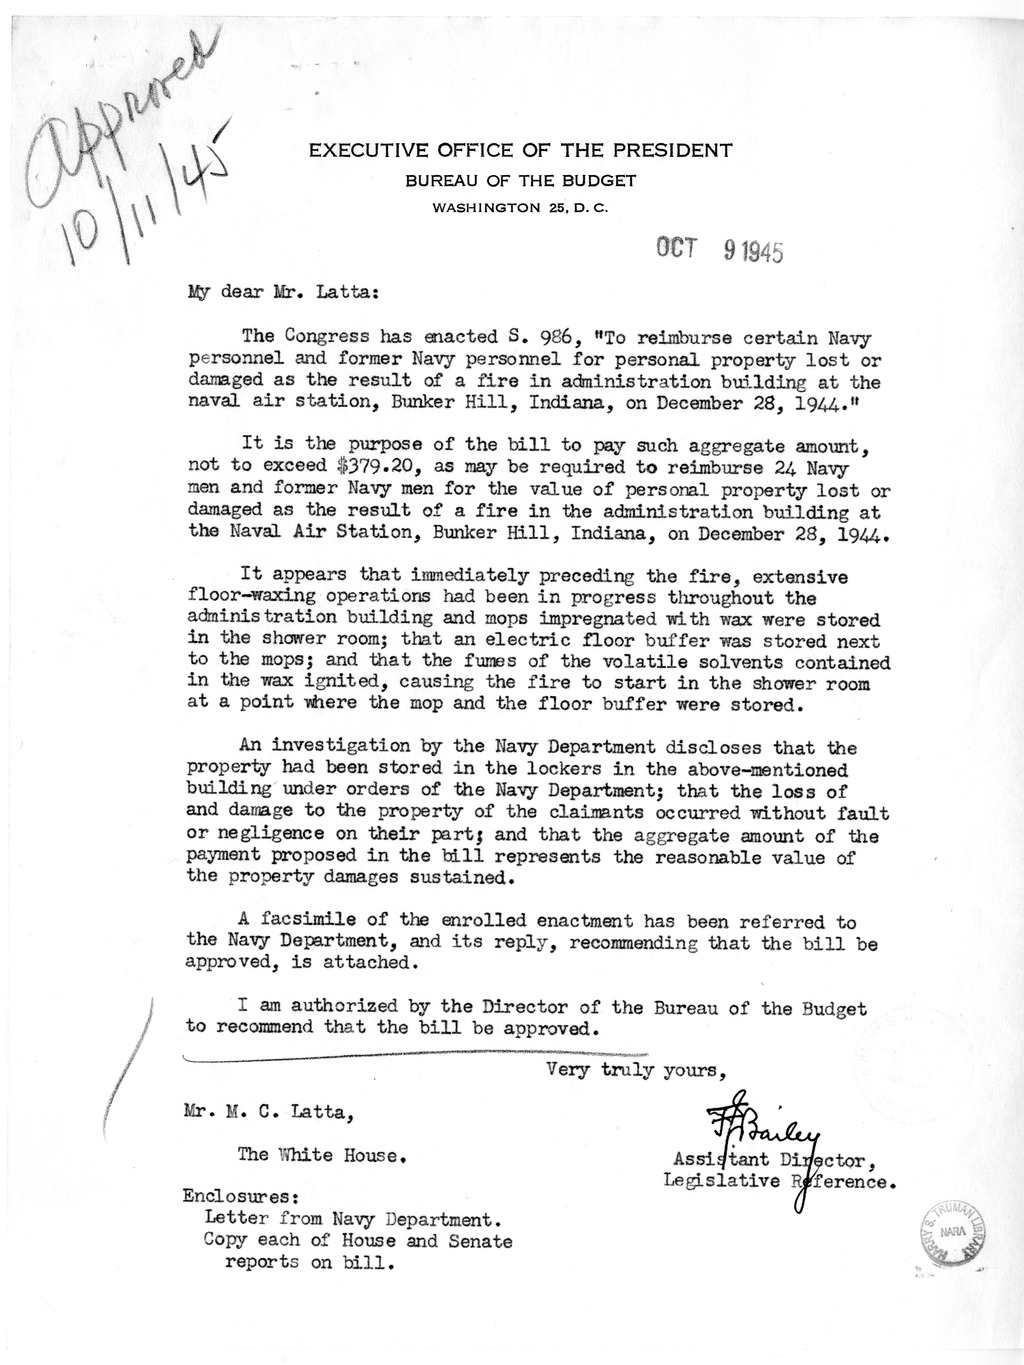 Memorandum from Frederick J. Bailey to M. C. Latta, S. 986, To Reimburse Certain Navy Personnel and Former Navy Personnel for Personal Property Lost or Damaged as the Result of a Fire in Administrative Building at the Naval Air Station, Bunker Hill, India